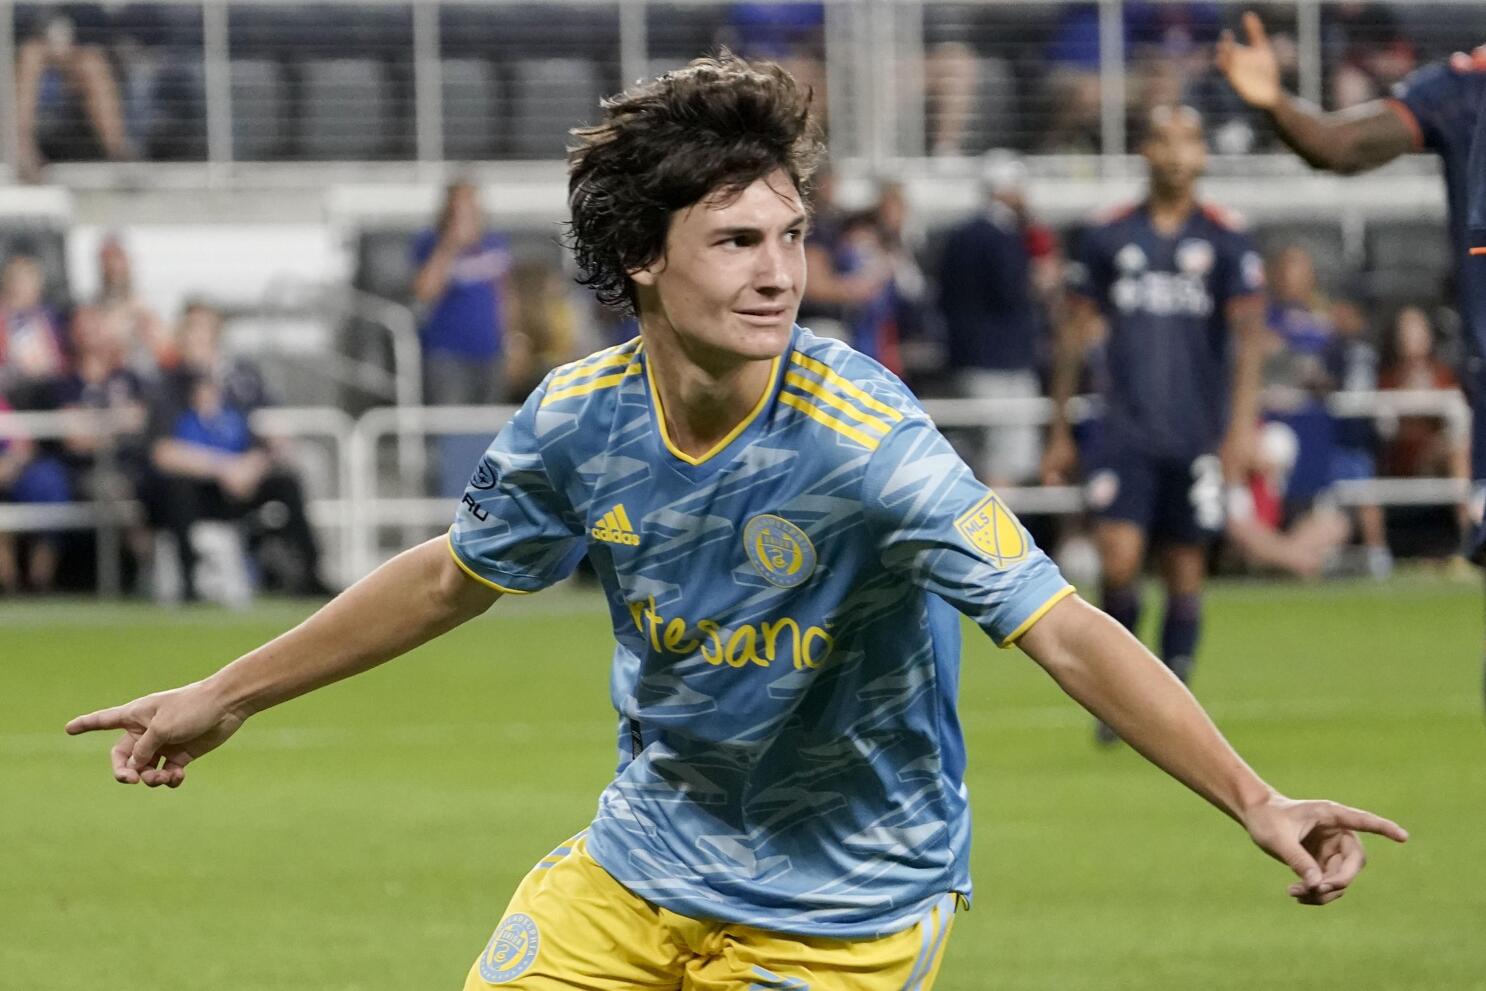 The 2020 MLS kits show growth is needed - Brotherly Game